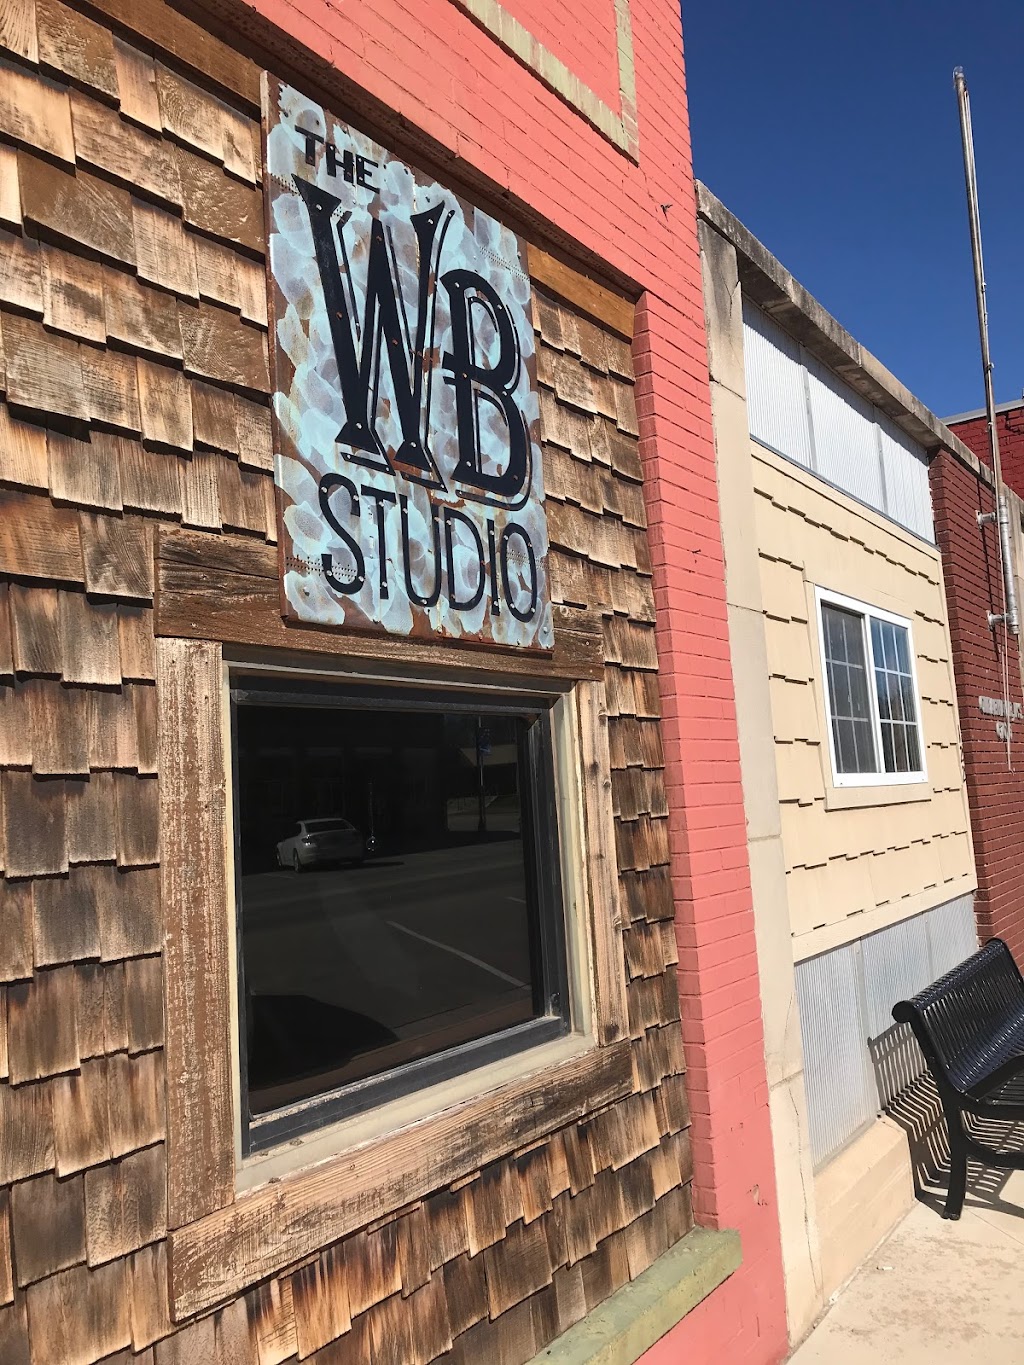 The WB Studio | 120 Ross Ave, Clearwater, KS 67026, USA | Phone: (316) 558-8228